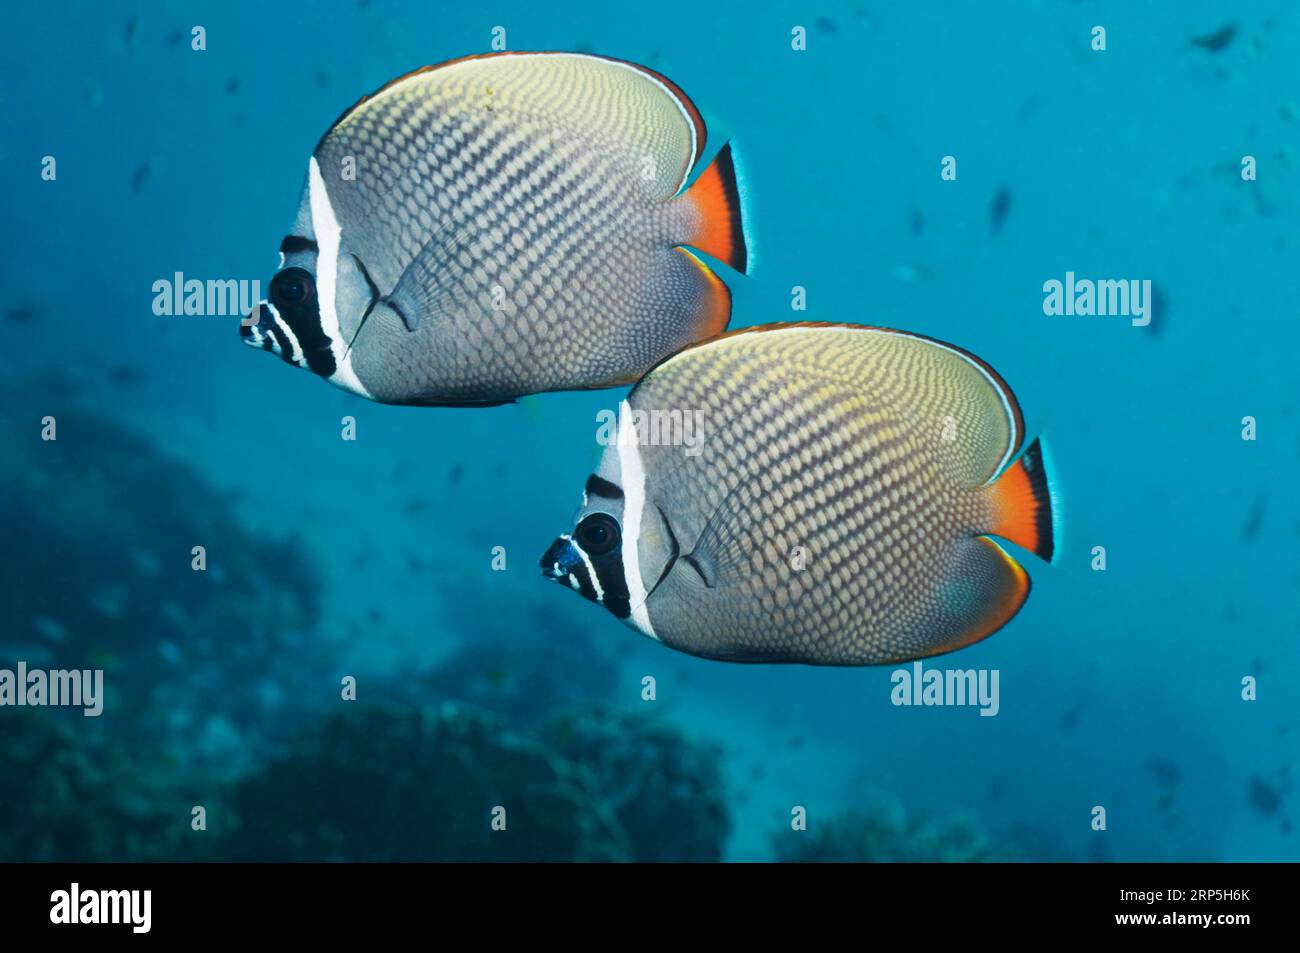 Redtail butterflyfish (Chaetodon collare).  Andaman Sea, Thailand. Stock Photo